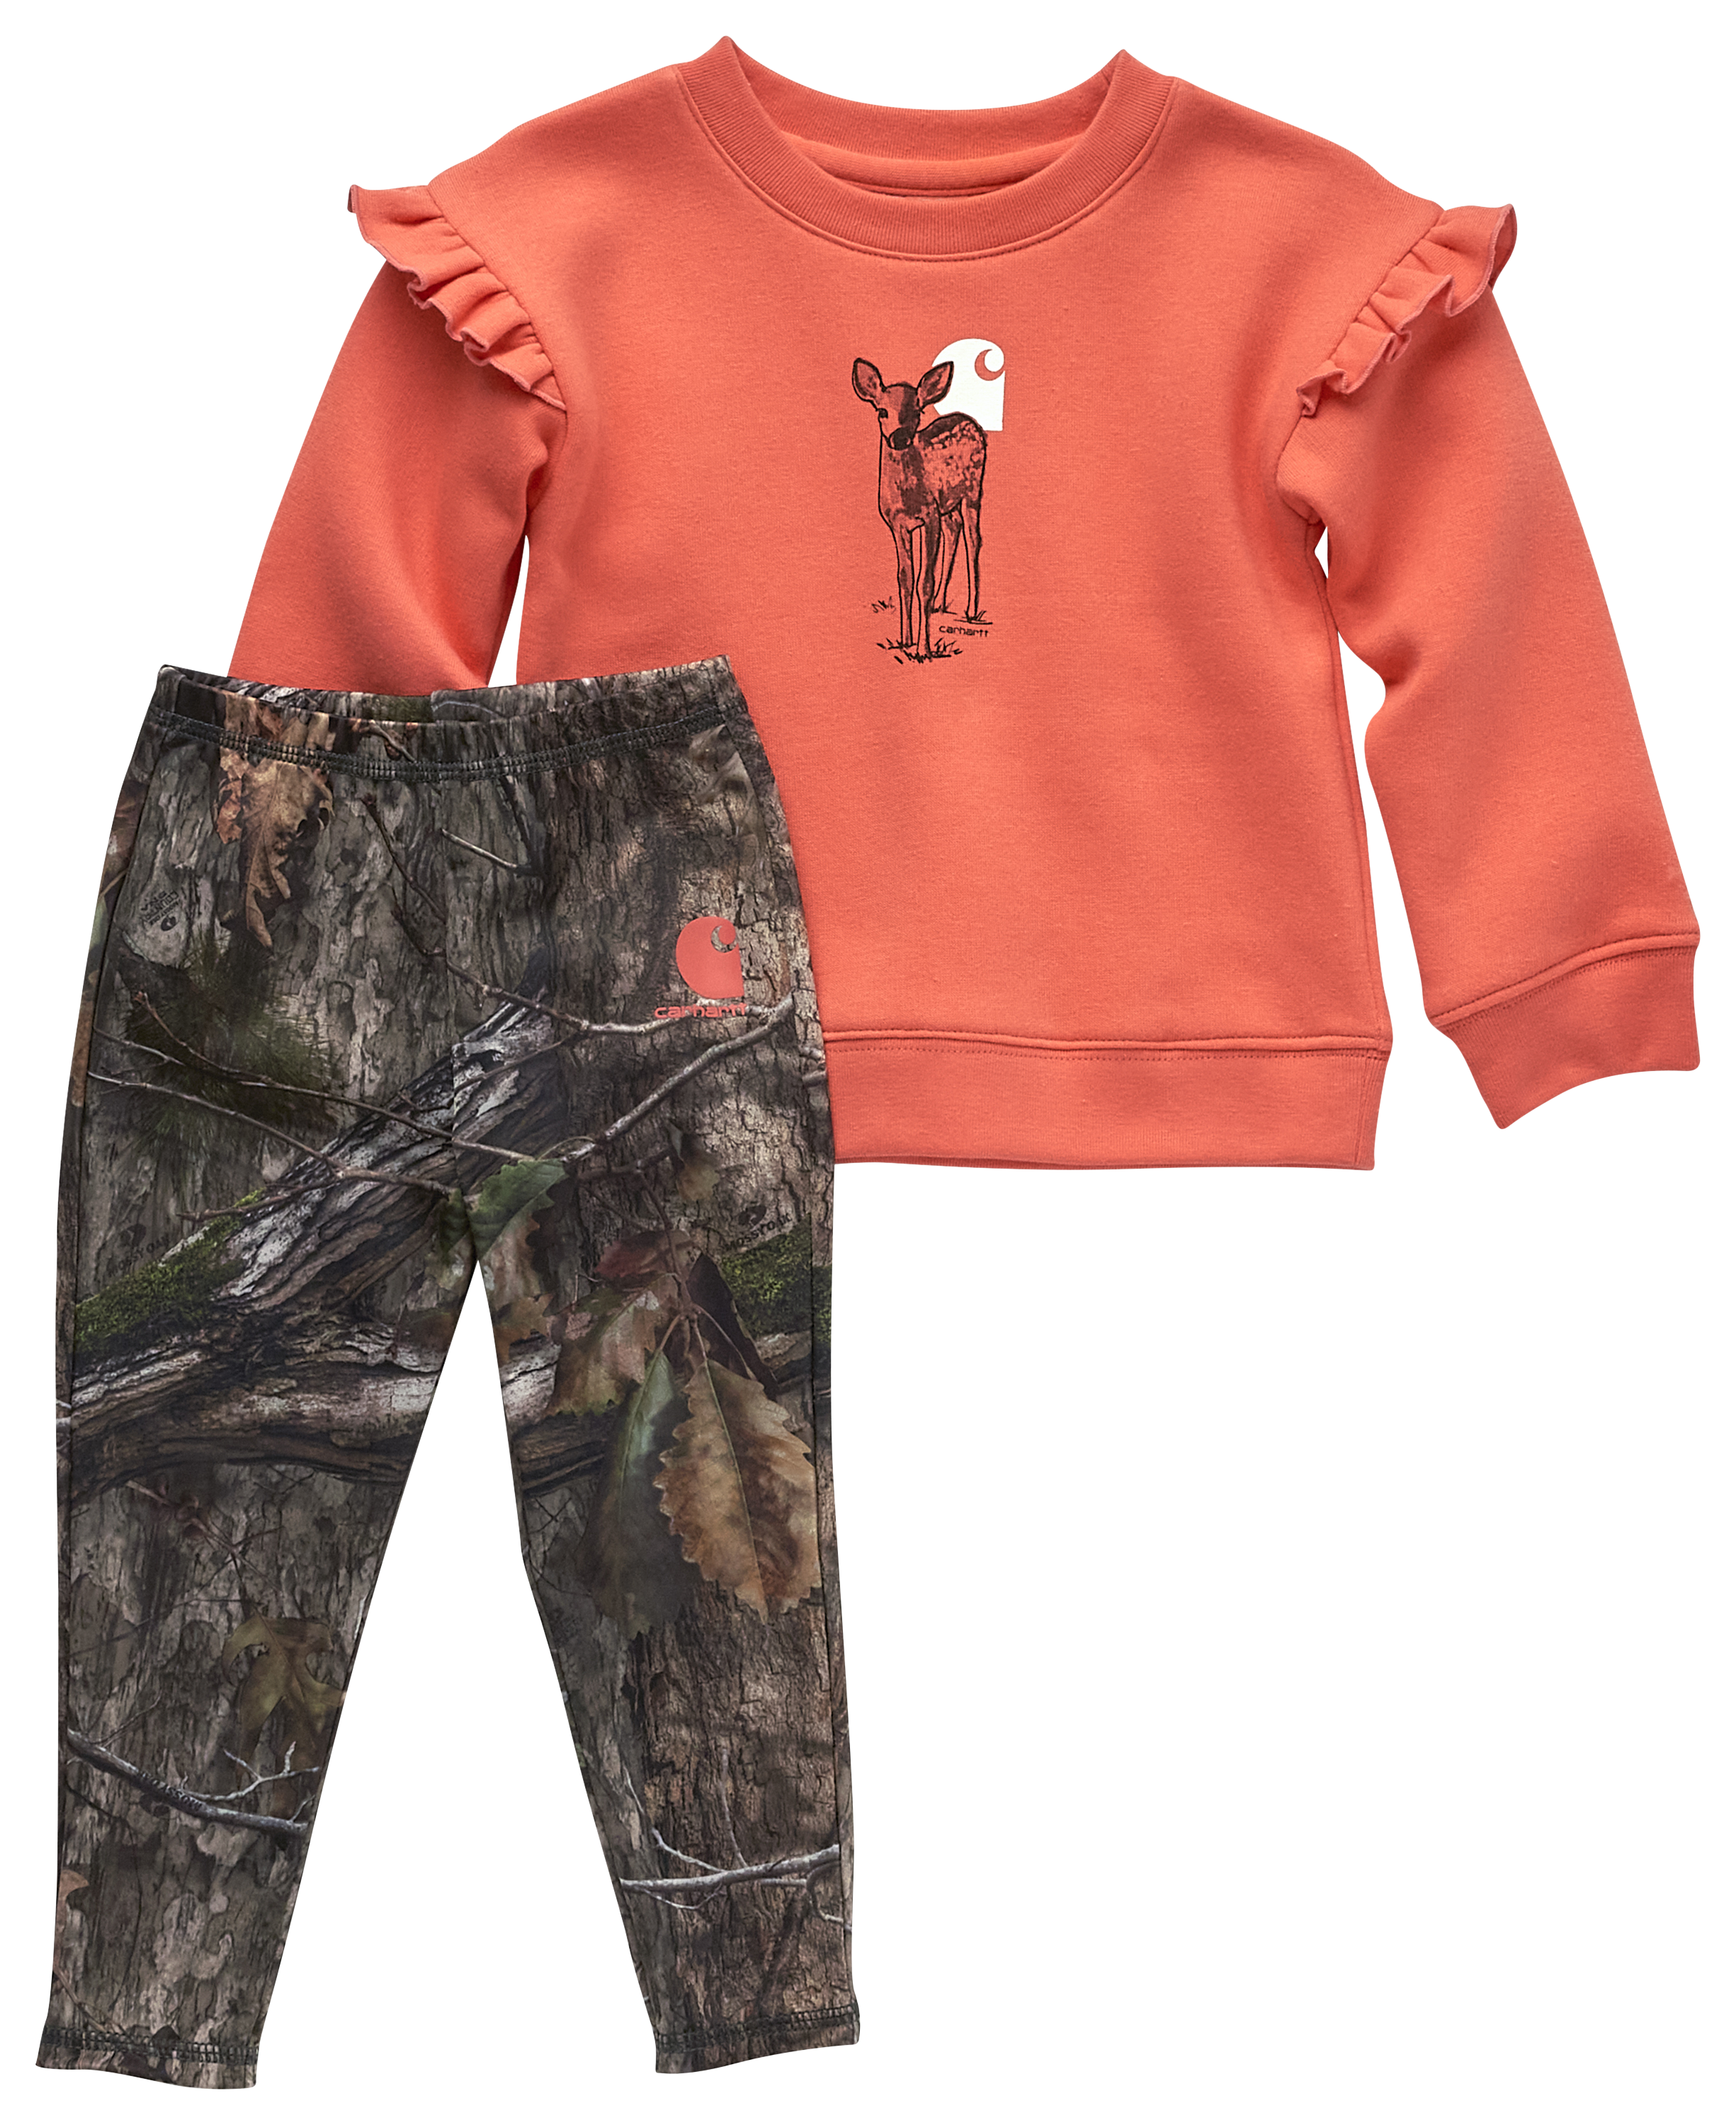 Carhartt Deer Long-Sleeve T-Shirt and Camo Leggings 2-Piece Set for Toddlers - Mossy Oak Country DNA - 4T